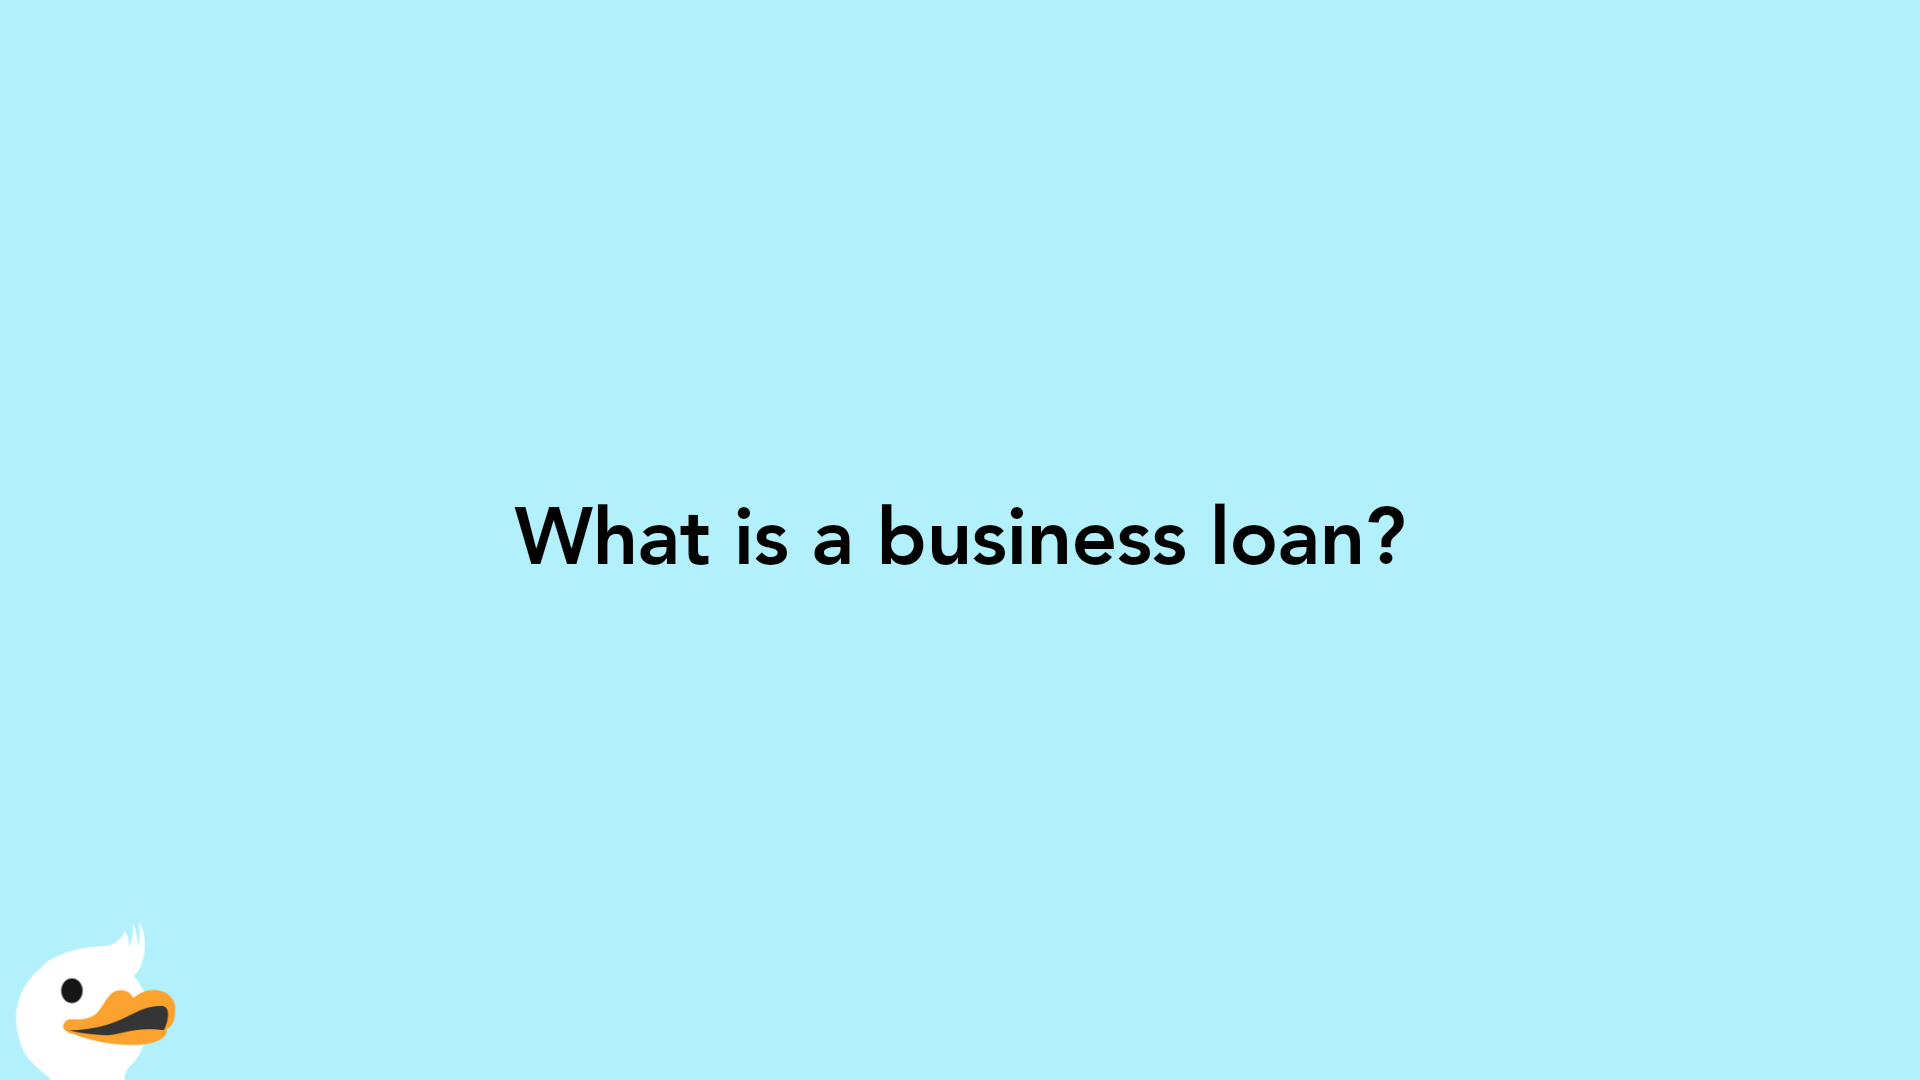 What is a business loan?